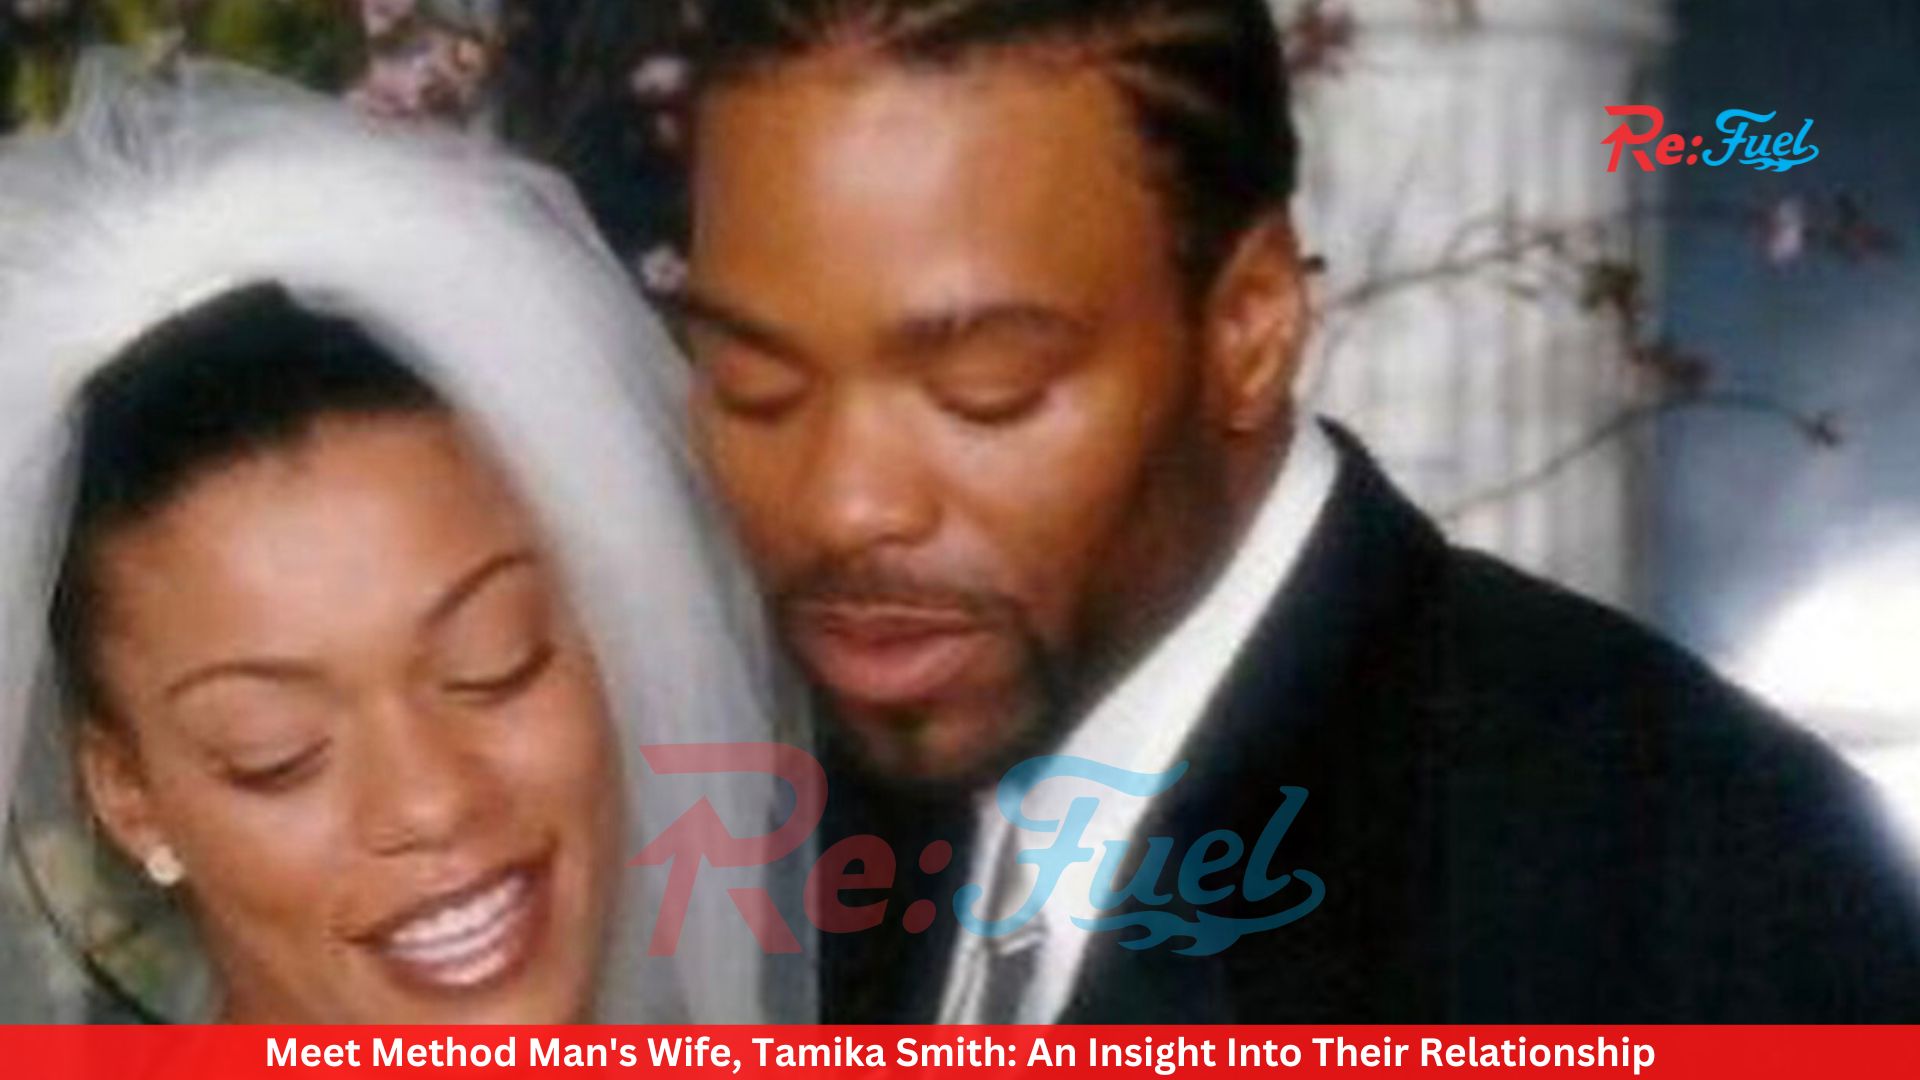 Meet Method Man's Wife, Tamika Smith: An Insight Into Their Relationship